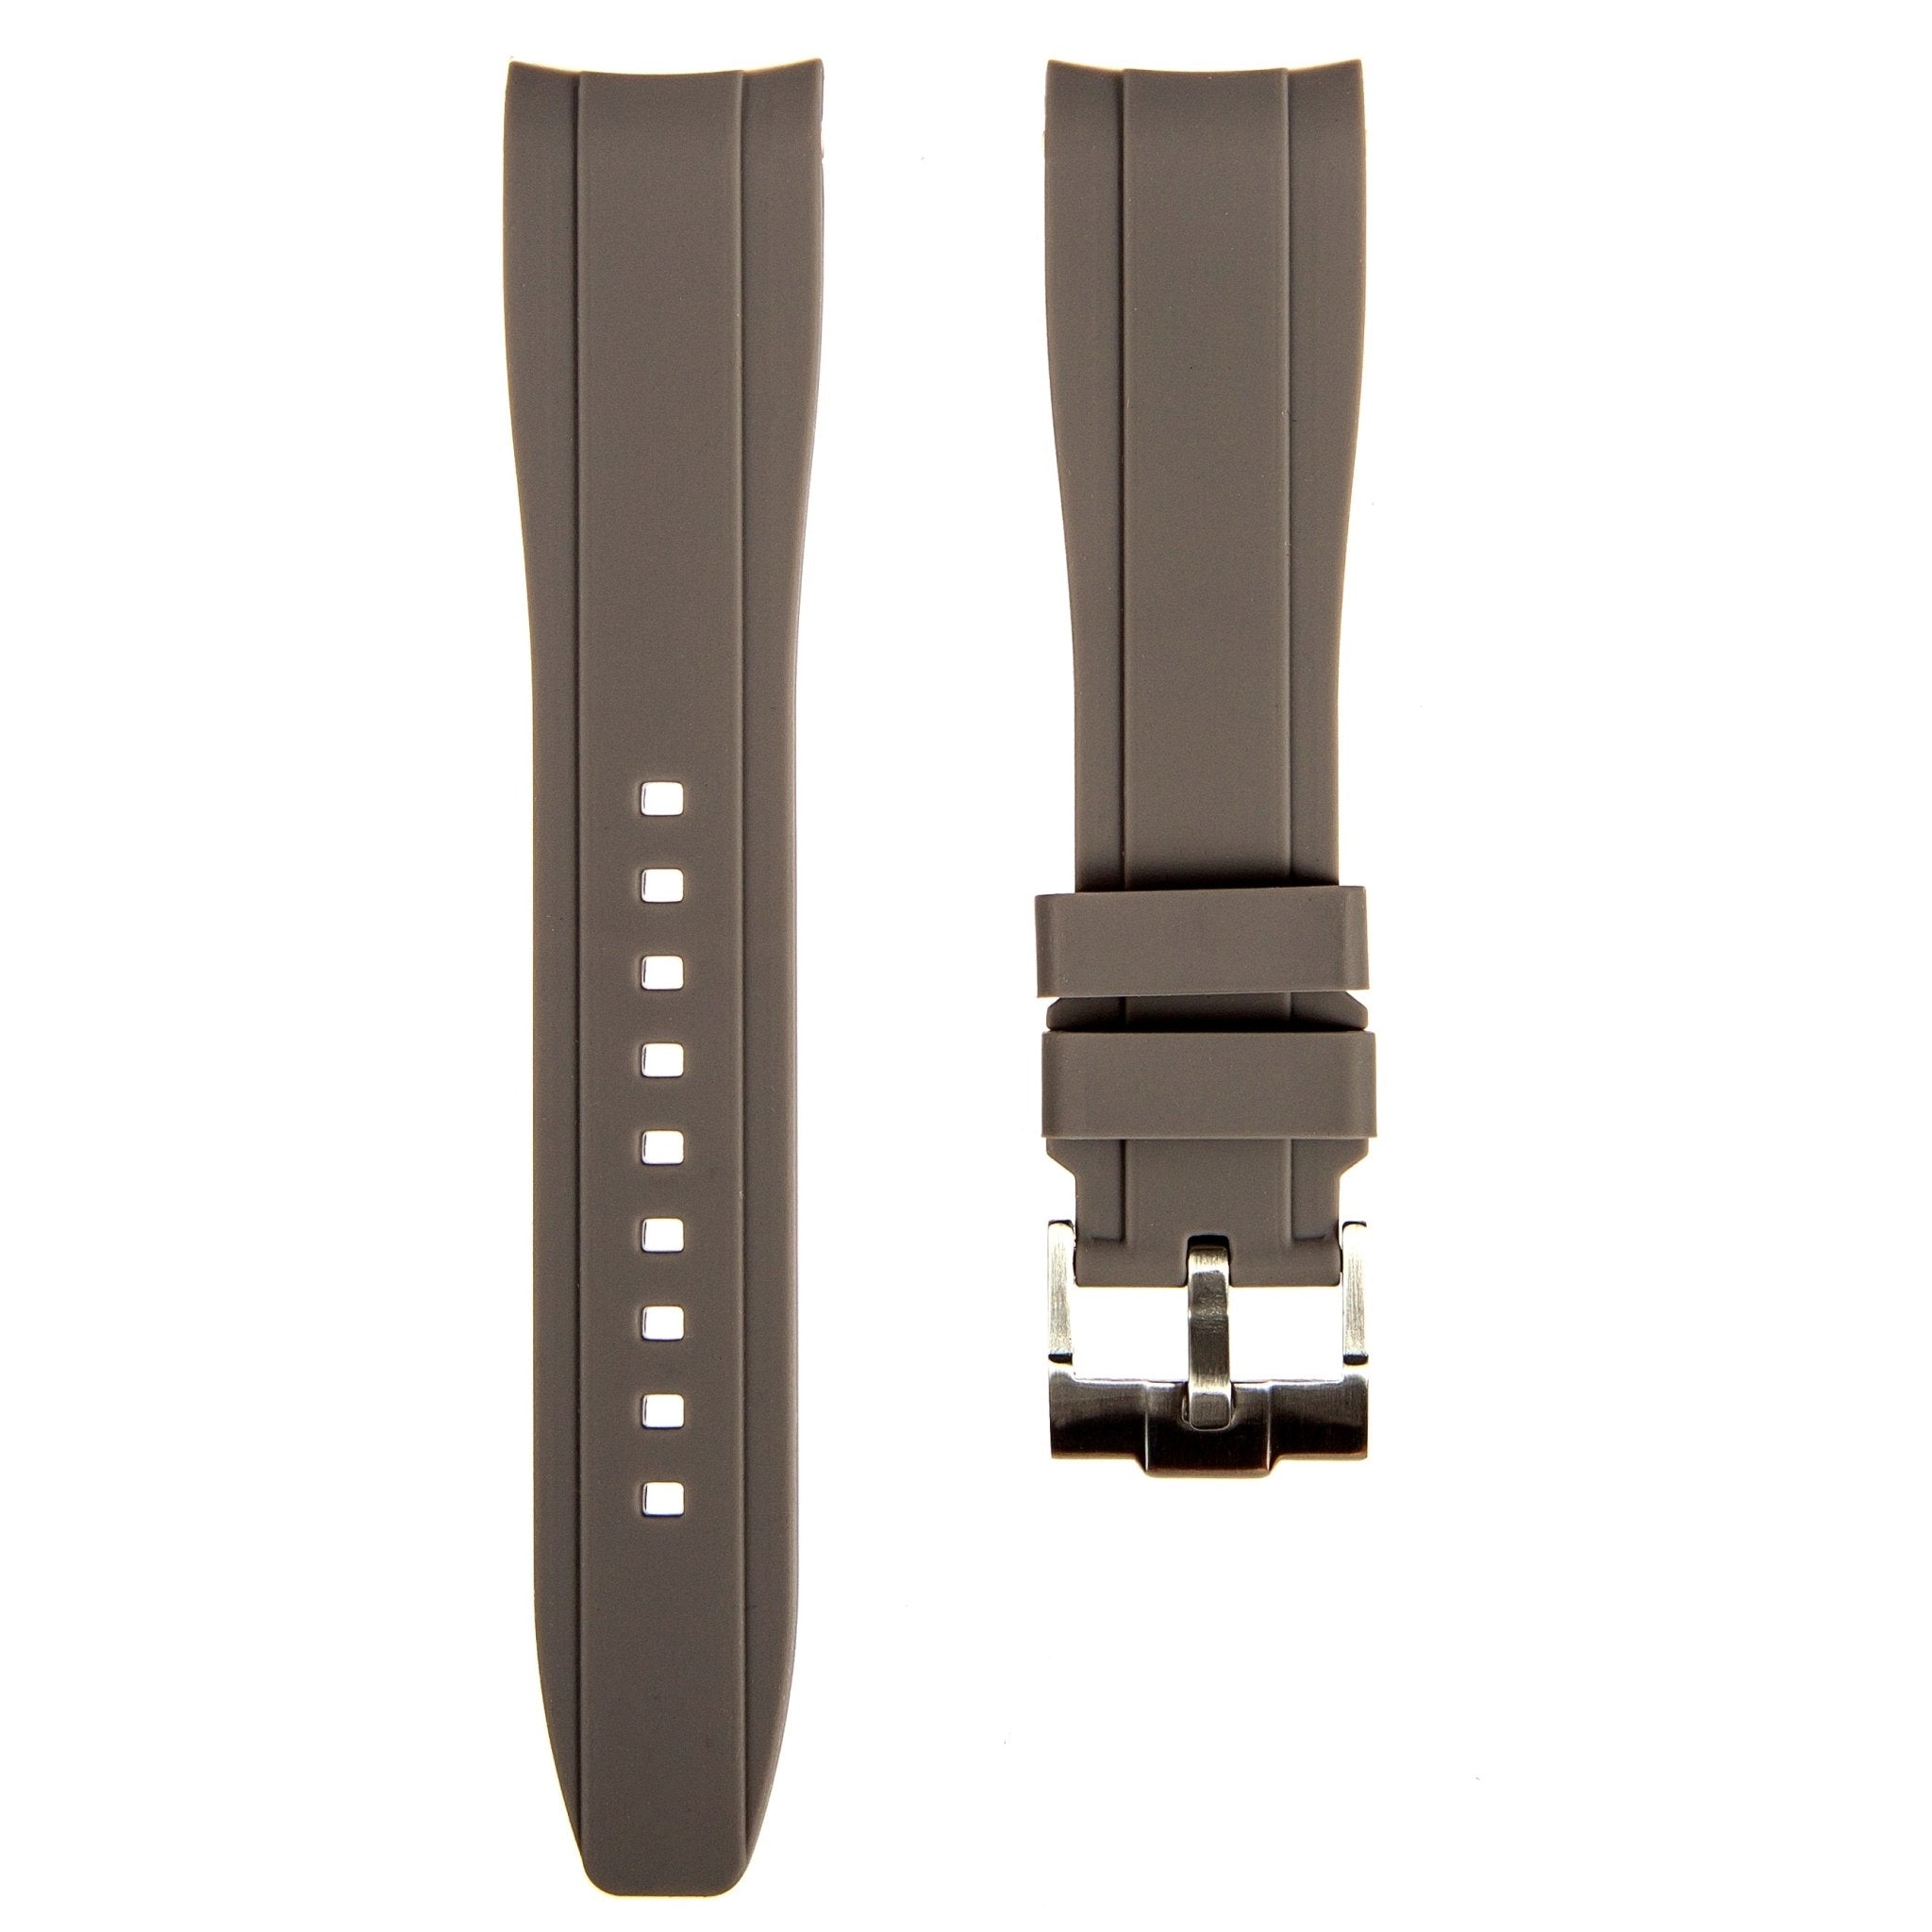 Curved End Soft Silicone Strap - Compatible with Rolex Submariner - Grey (2418) -StrapSeeker